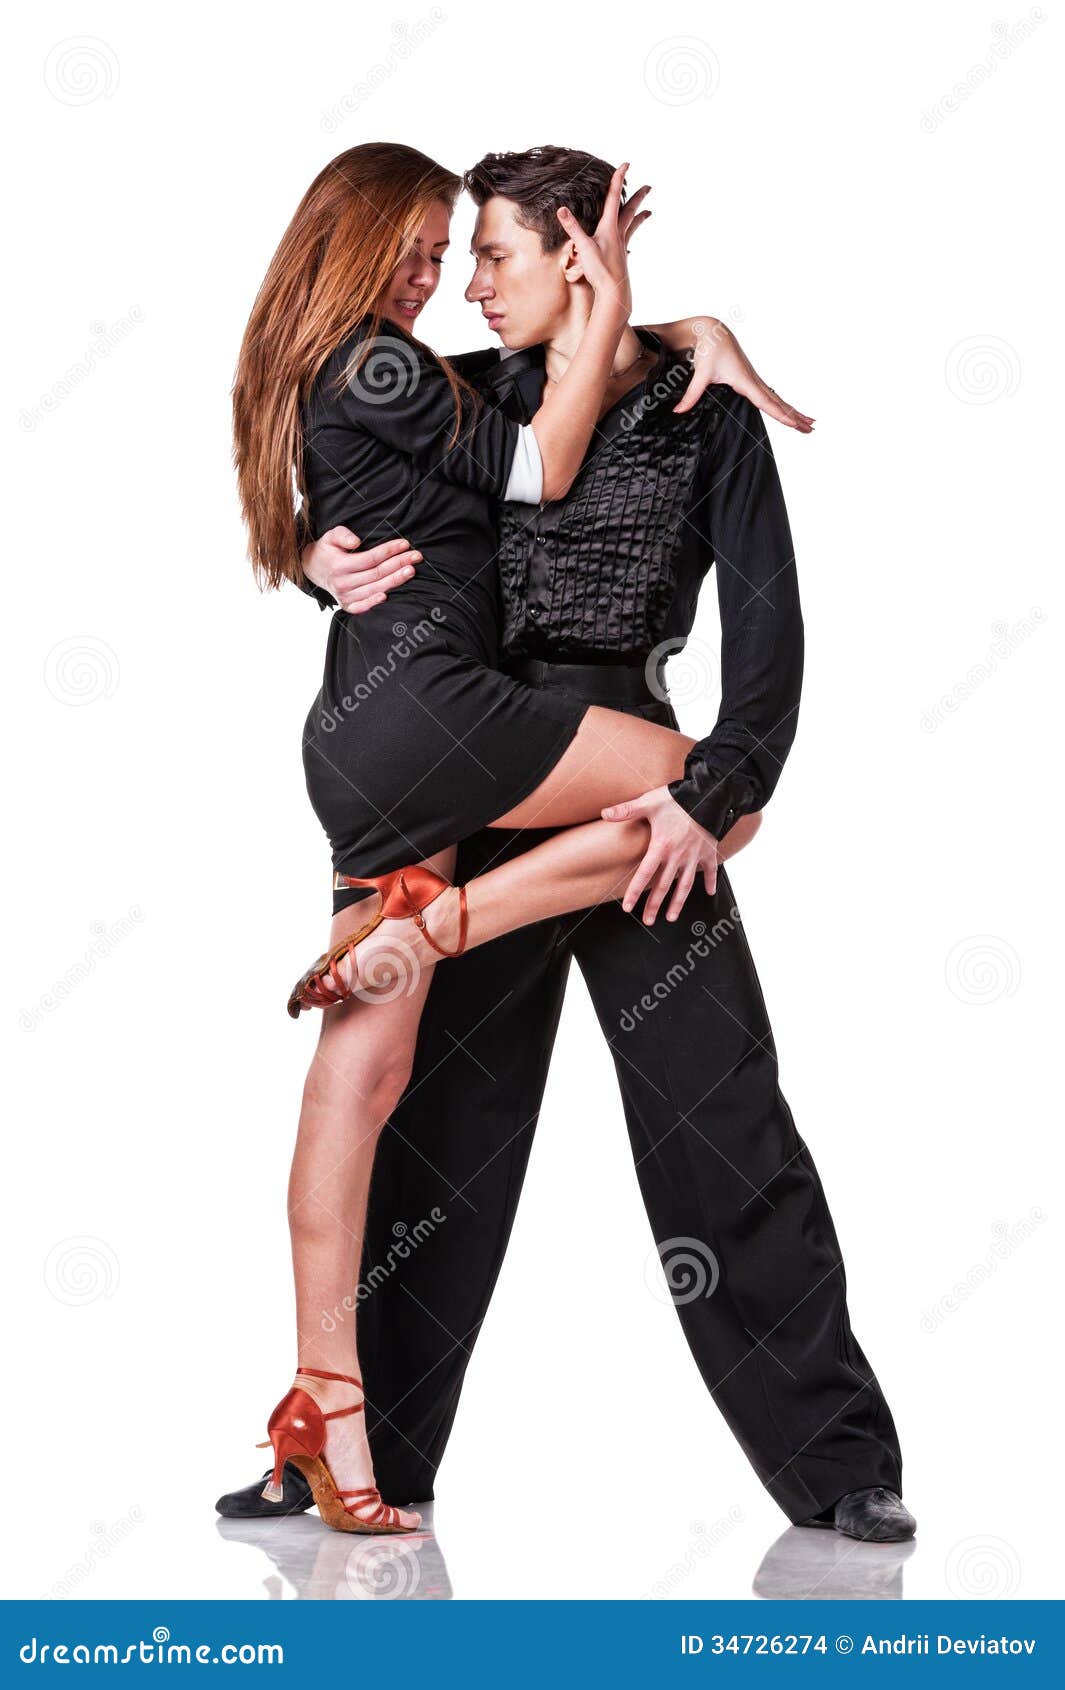 sensual salsa dancing couple on white background